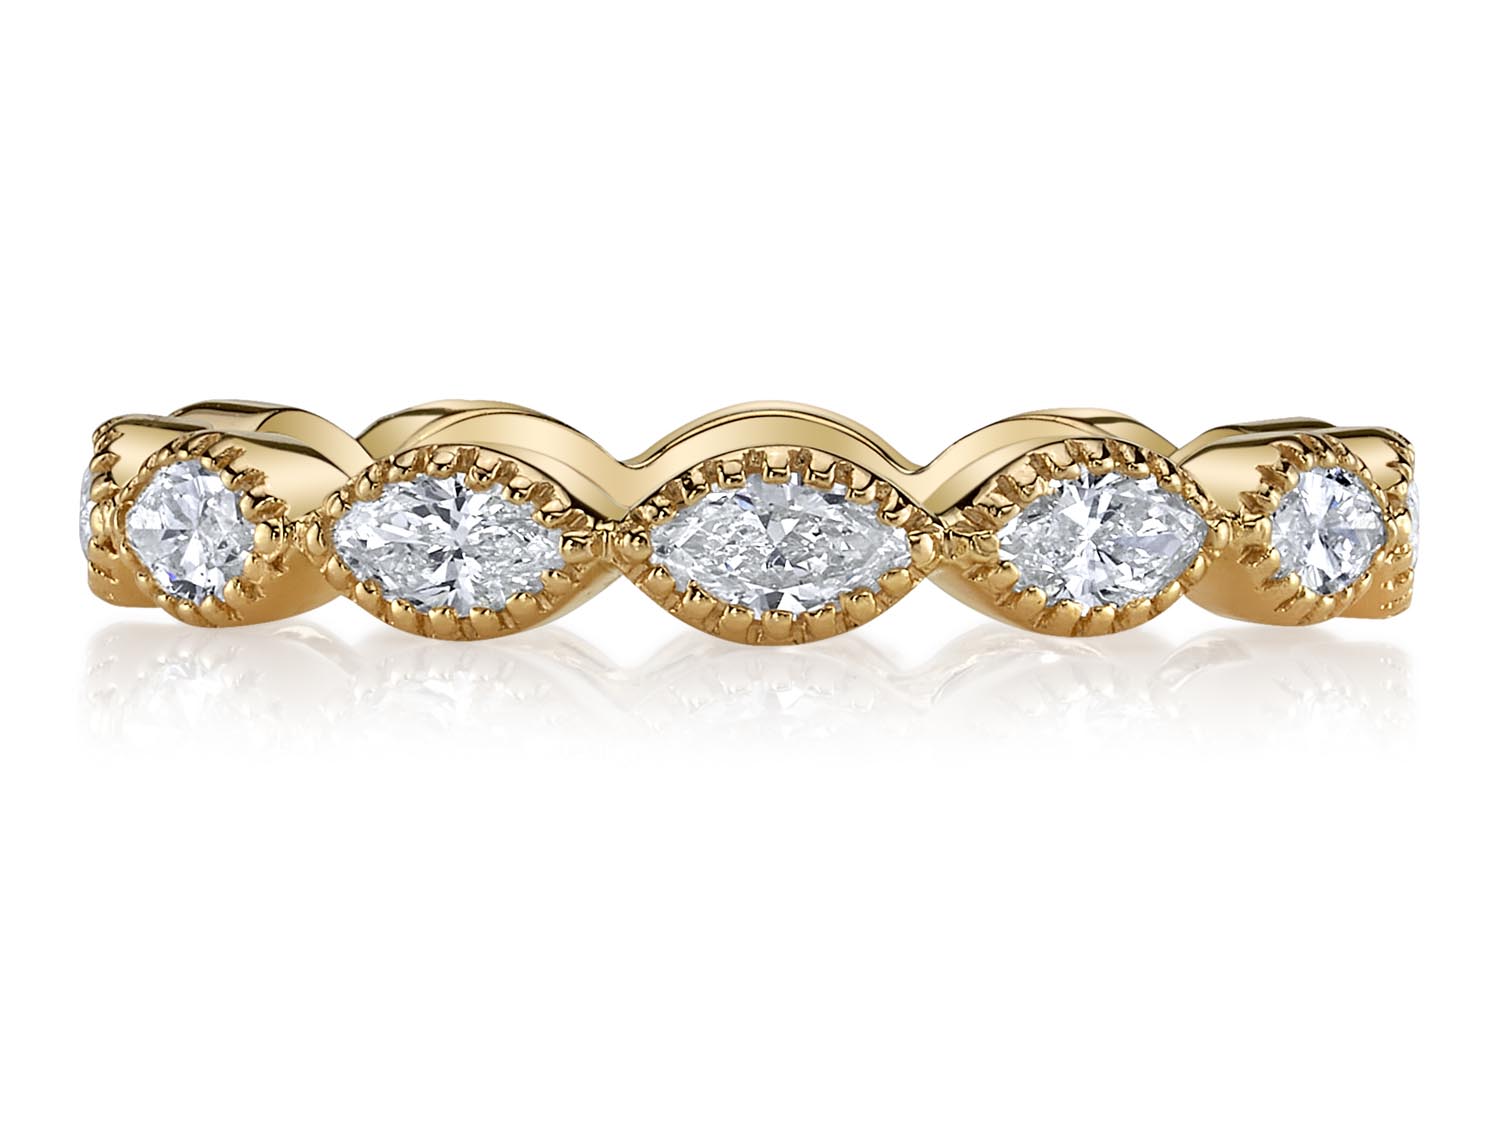 Vintage-Inspired Marquise Diamond Band in 18K Yellow Gold